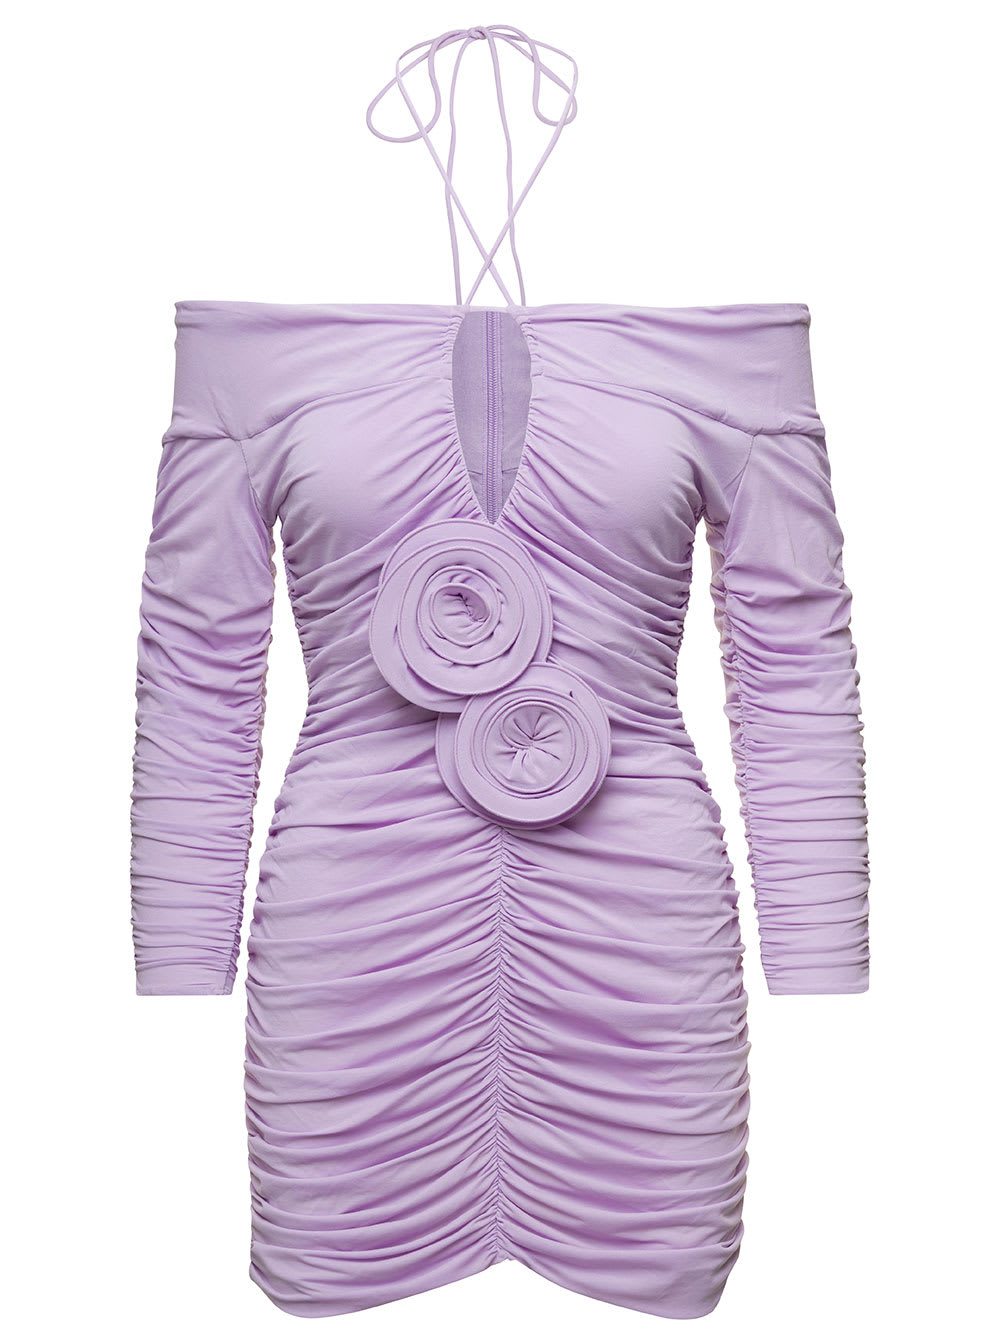 MAGDA BUTRYM LILAC GATHERED OFF-THE-SHOULDERS MINI DRESS WITH ROSES IN STRETCH COTTON WOMAN